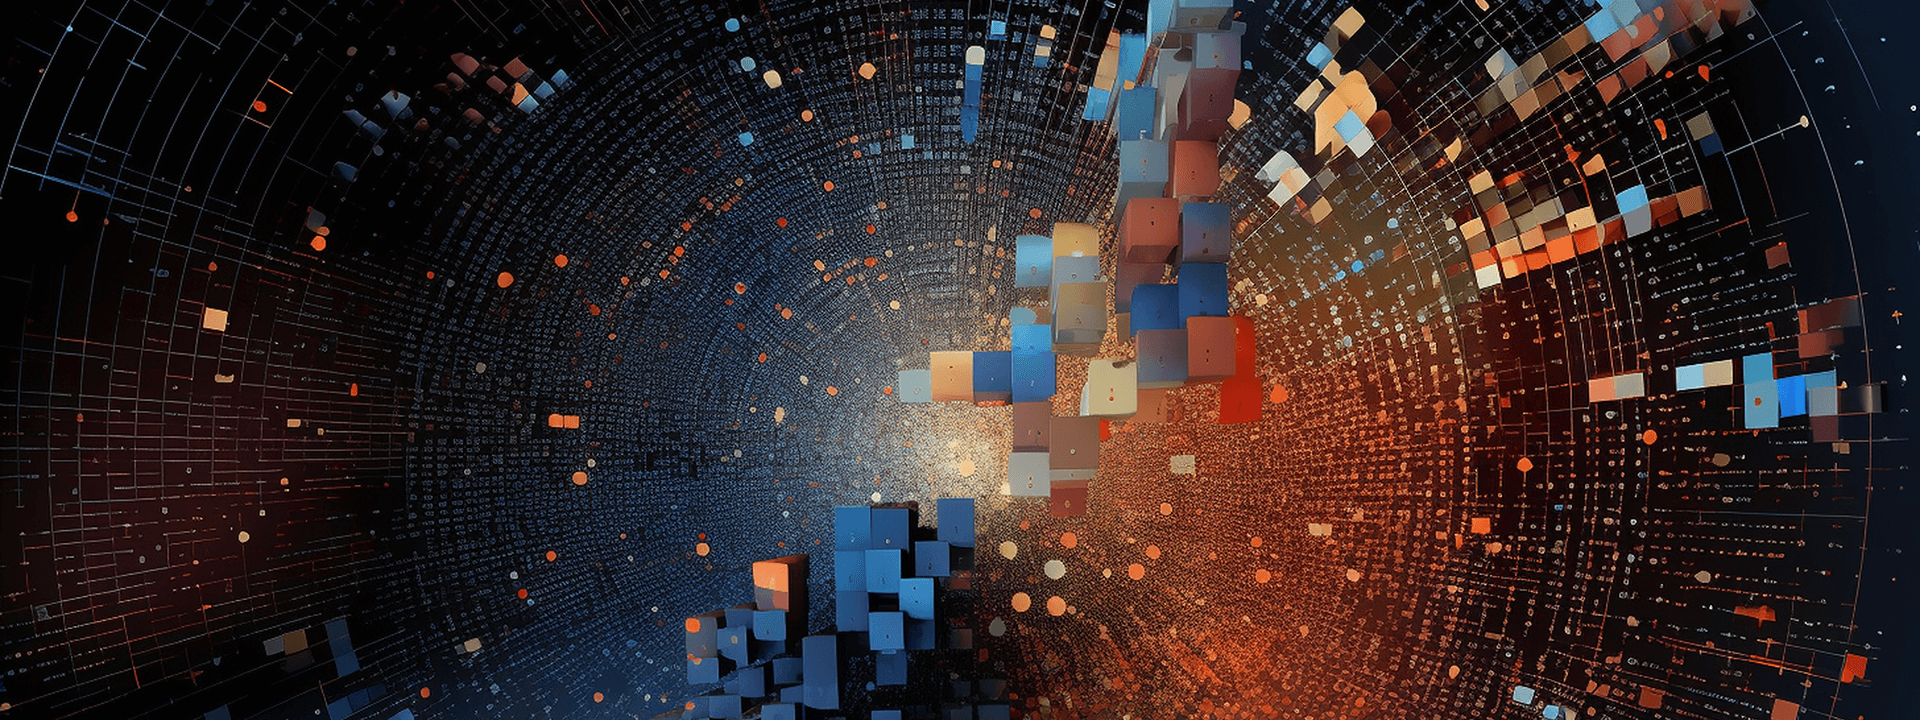 Digital graphic of a vortex composed of multicolored cubes and grid lines against a dark background, creating a visual effect of data or information traveling through cyberspace.